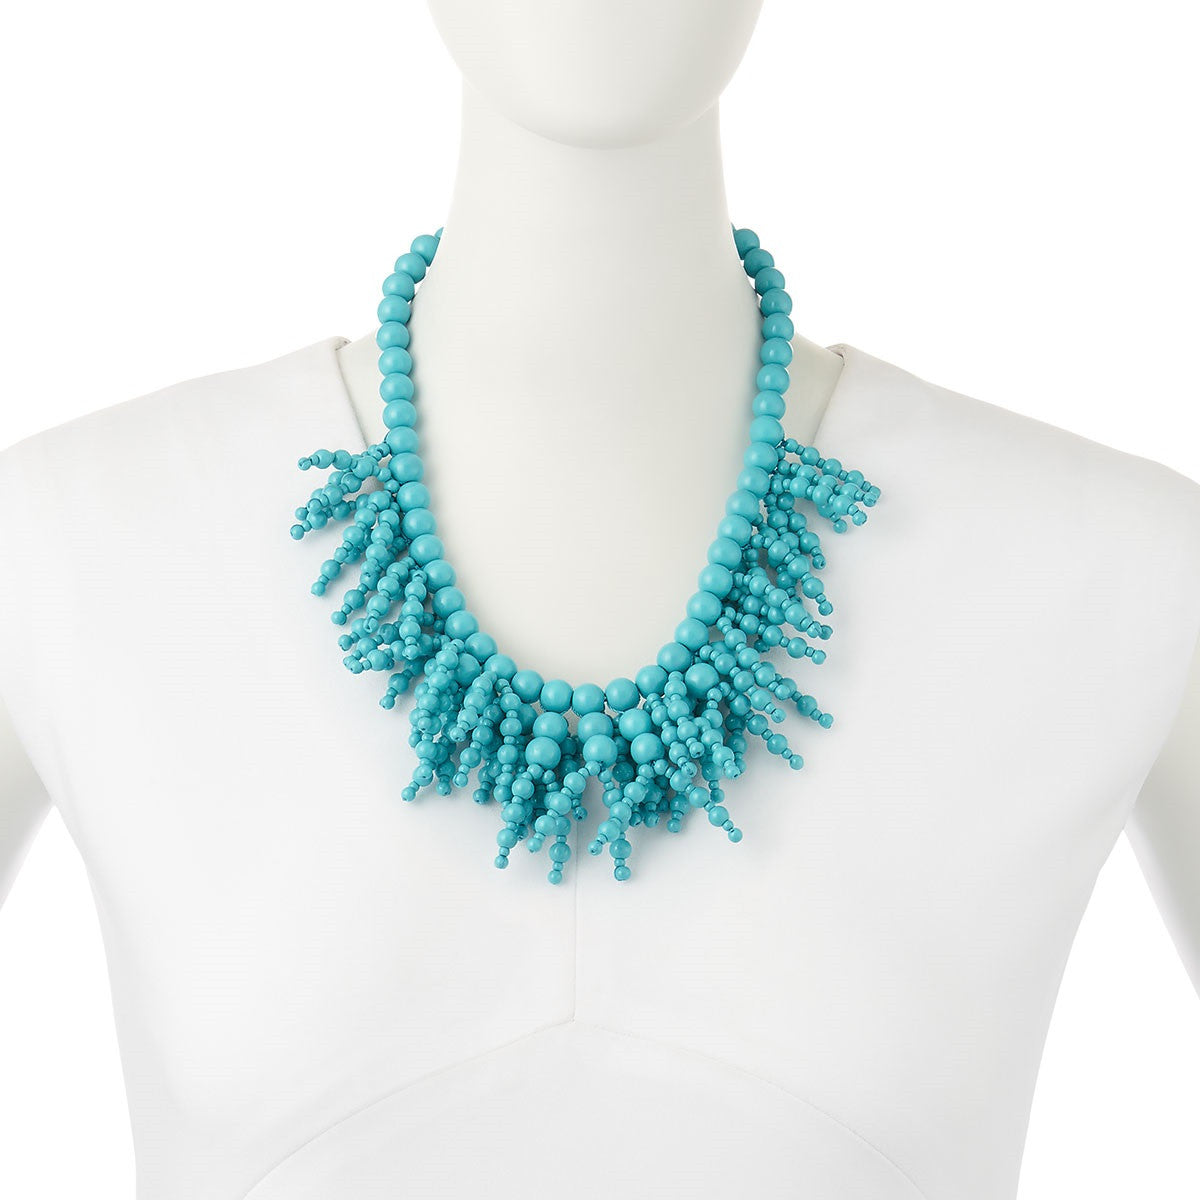 Kate Spade Turquoise Fringe Bead Necklace on Mannequin